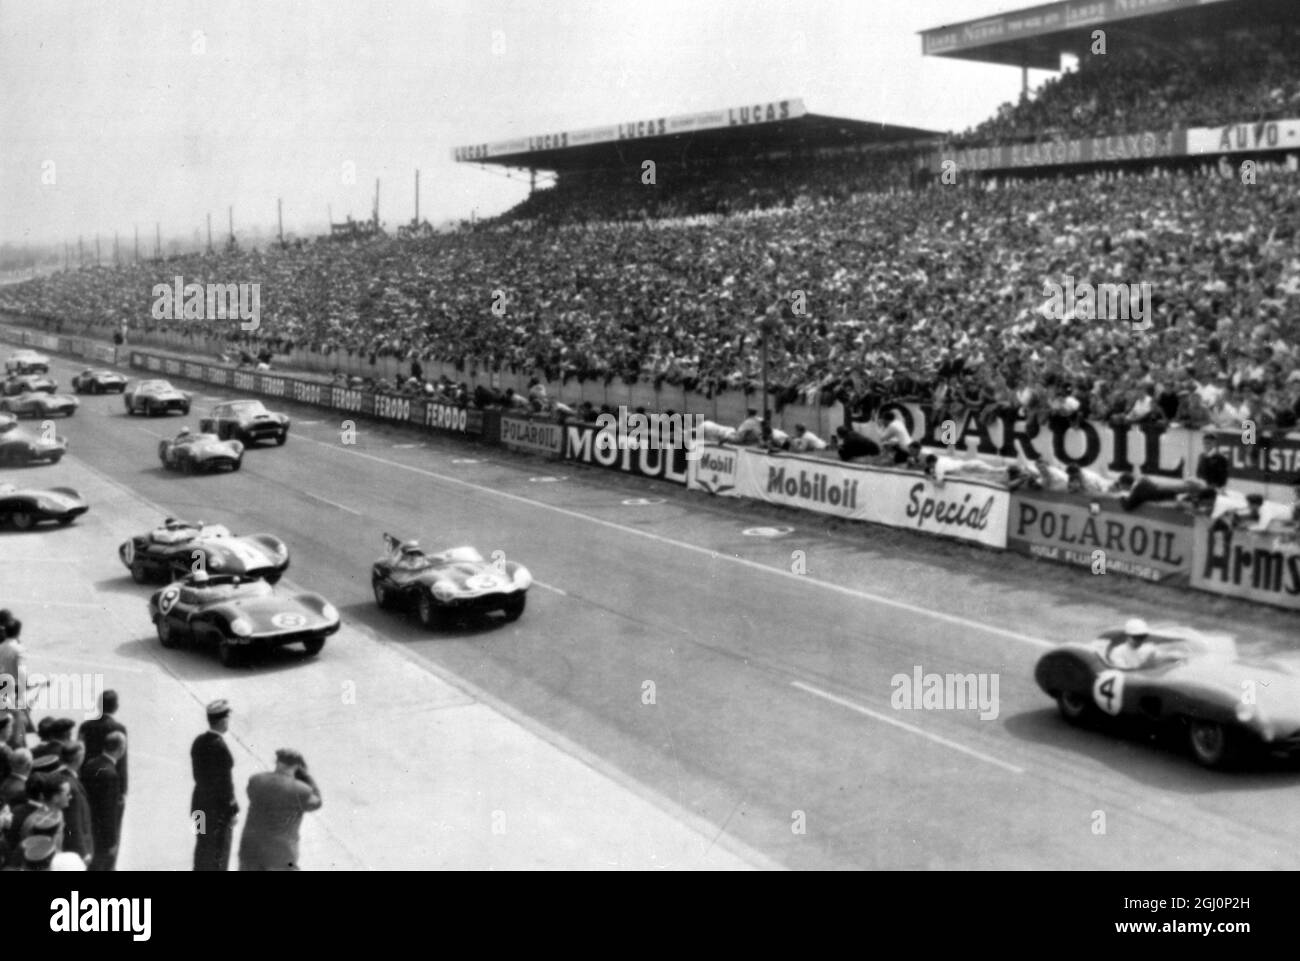 Moss leads from the start in the Le Mans grand Prix . Le Mans , France ; At the start of the Le Mans Grand Prix , British racing driver , Stirling Moss leads the field of 53 cars in an Aston Martin ( No. 4 ) ; behind is Gregory of England in a Jaguar ( No. 3 ) and Flockhart of Scotland in a Jaguar ( No. 8 ) and Ivor Bueb of England ( No.1 ) . the Grand Prix race lasts 24 hours and is the most gruelling and dangerous in the racing calendar . 20 June 1959 Stock Photo